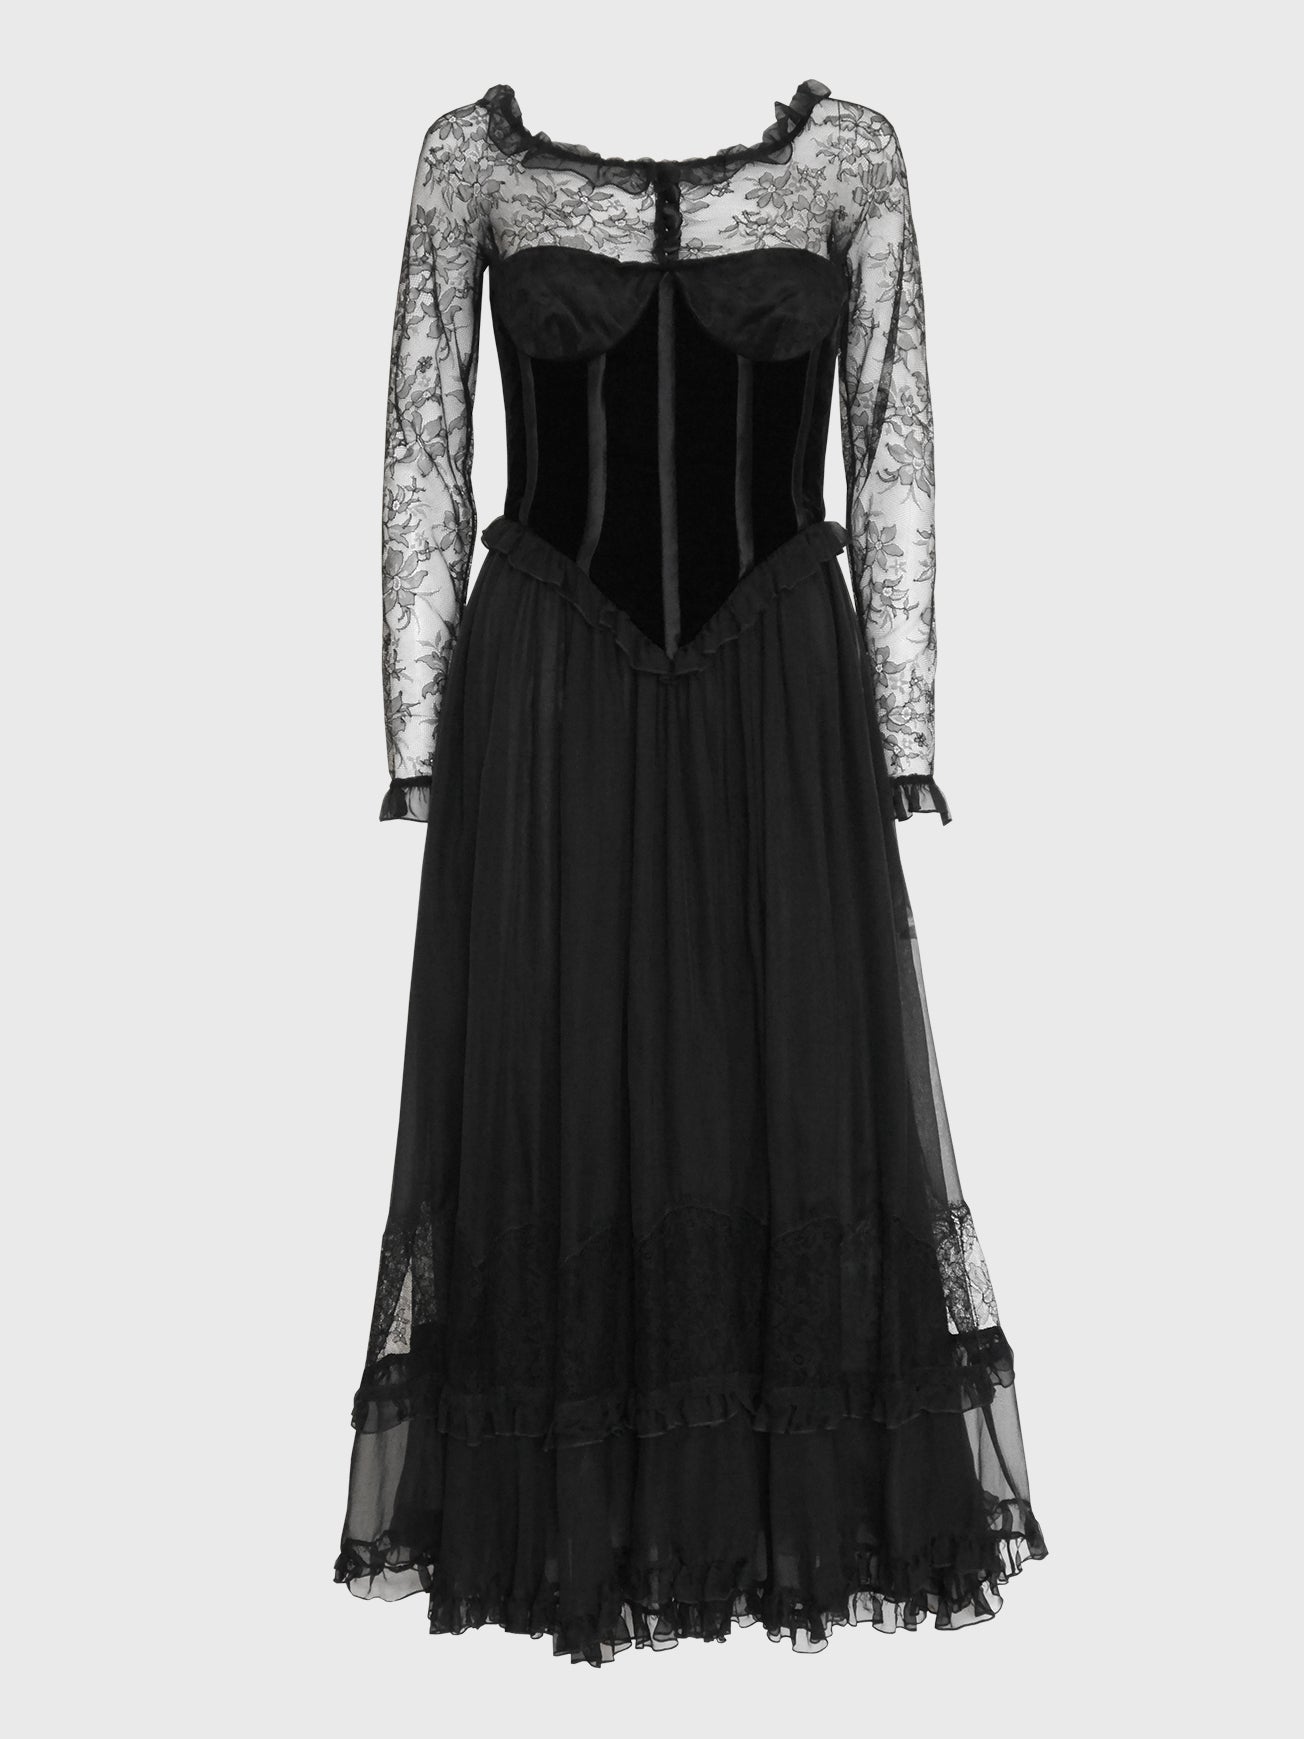 VALENTINO Vintage Black Lace & Silk Maxi Evening Gown